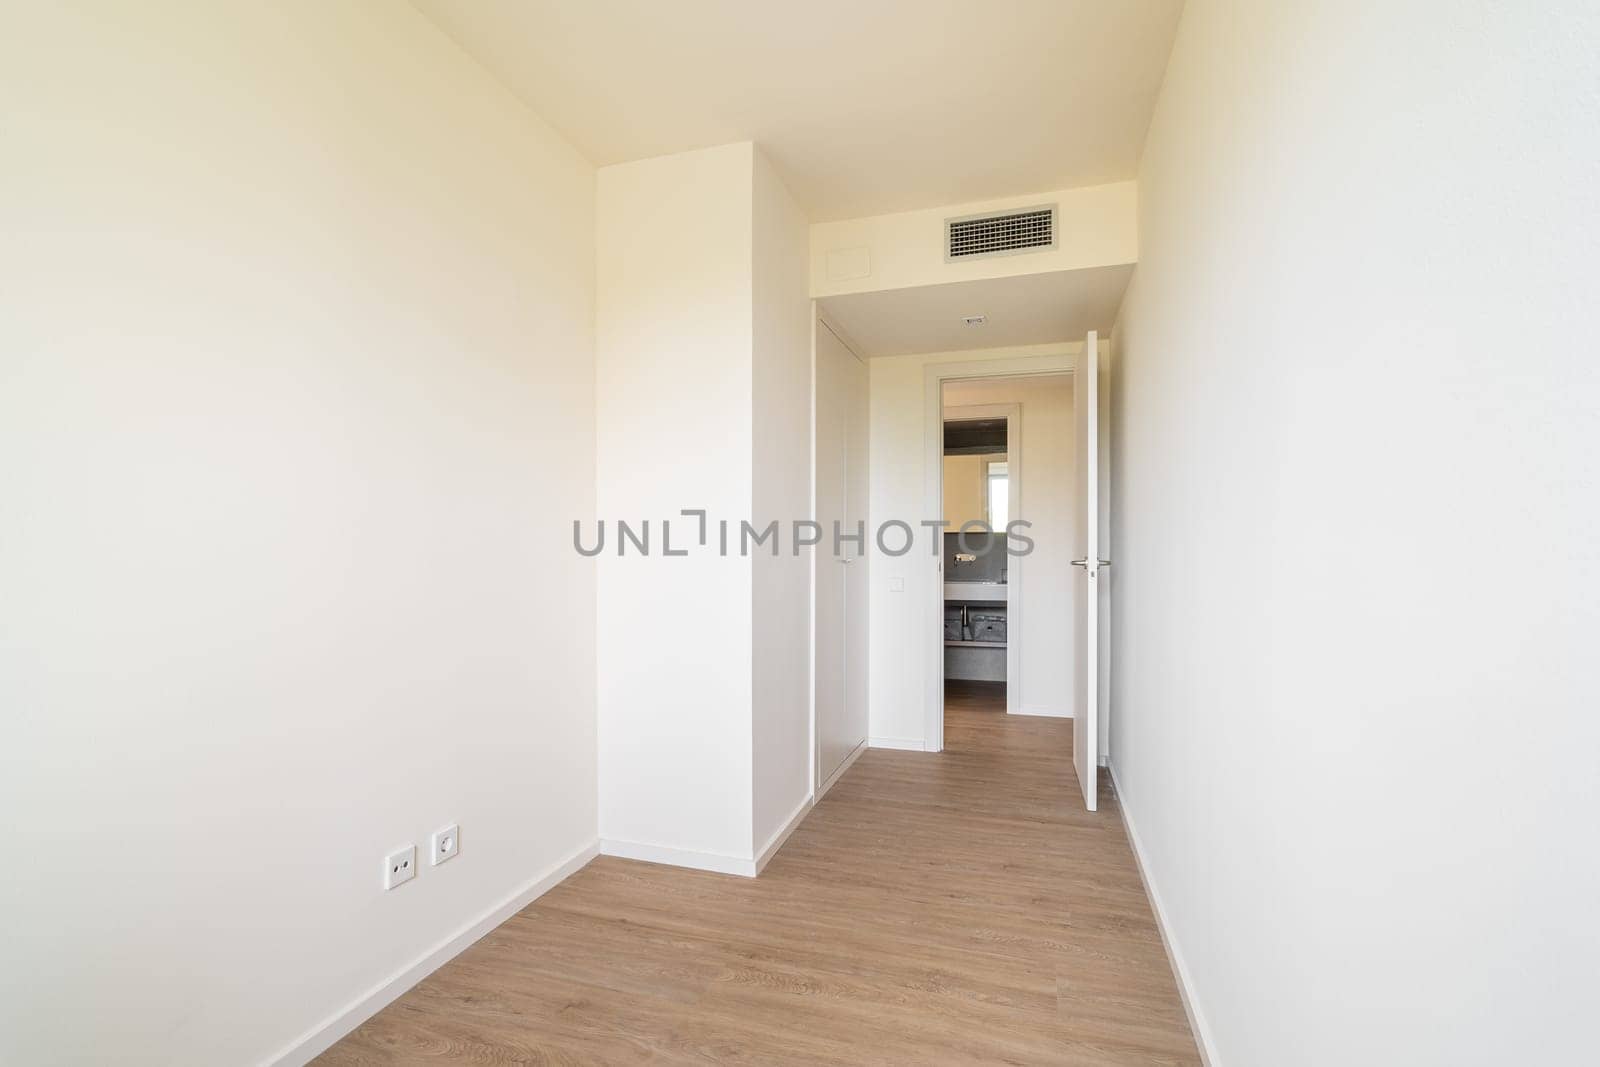 Empty rectangular premise for kitchen after renovation. Narrow unfurnished room with extractor hood over interior door. Unoccupied apartment